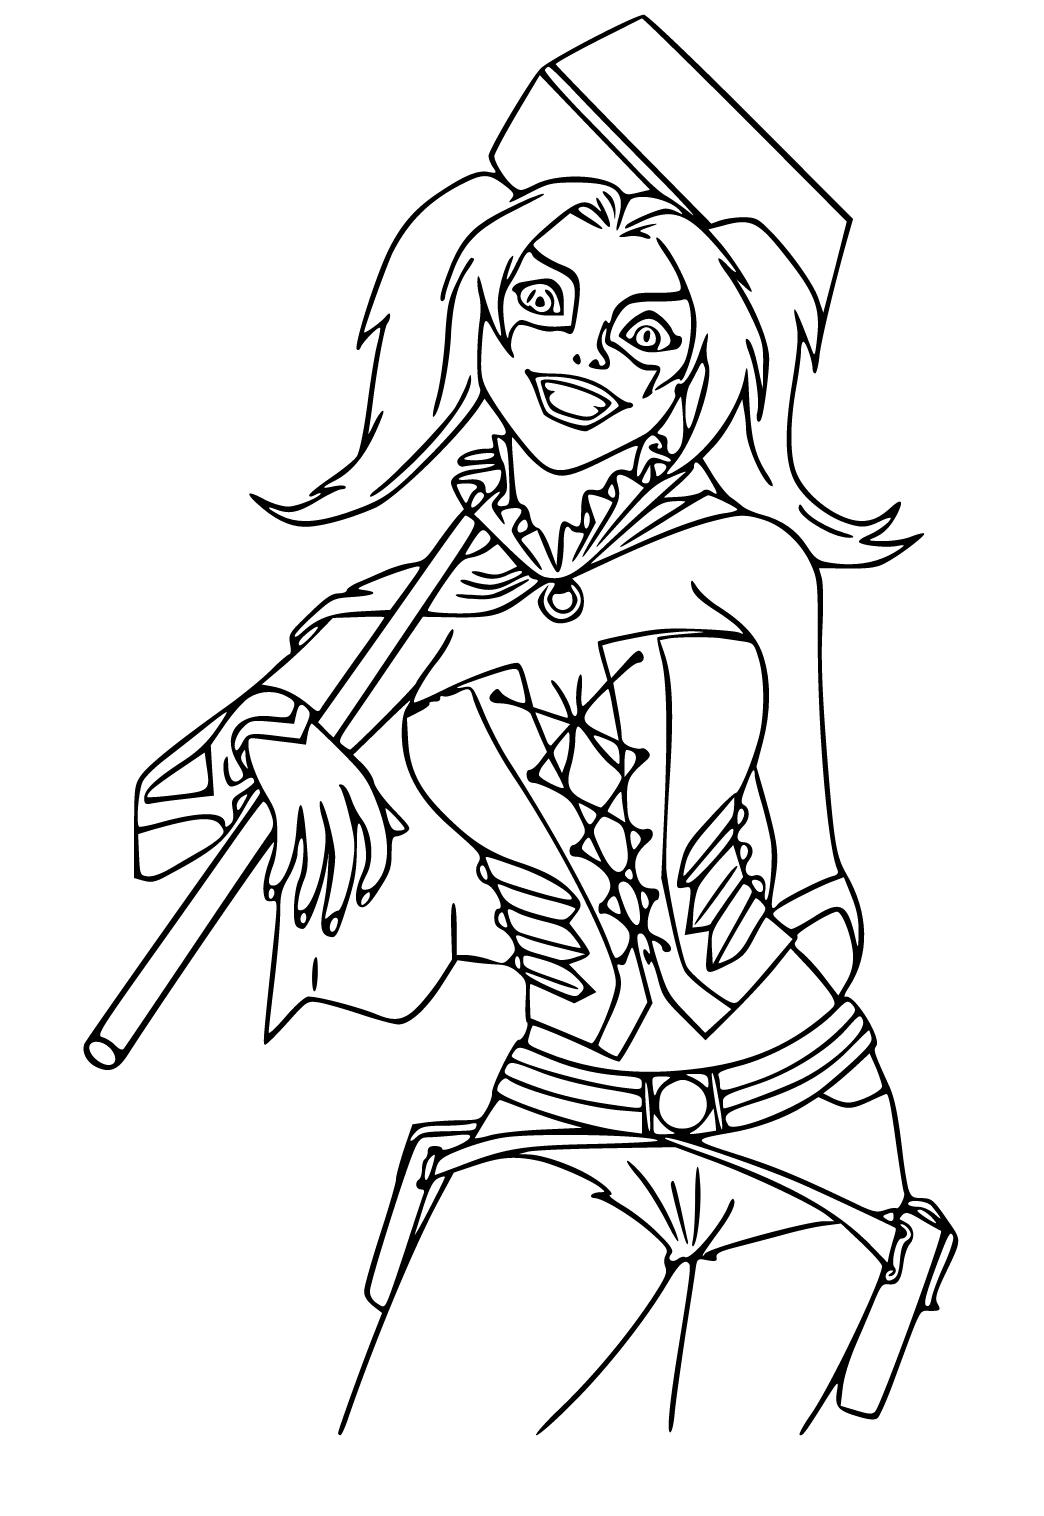 Free printable harley quinn hammer coloring page for adults and kids